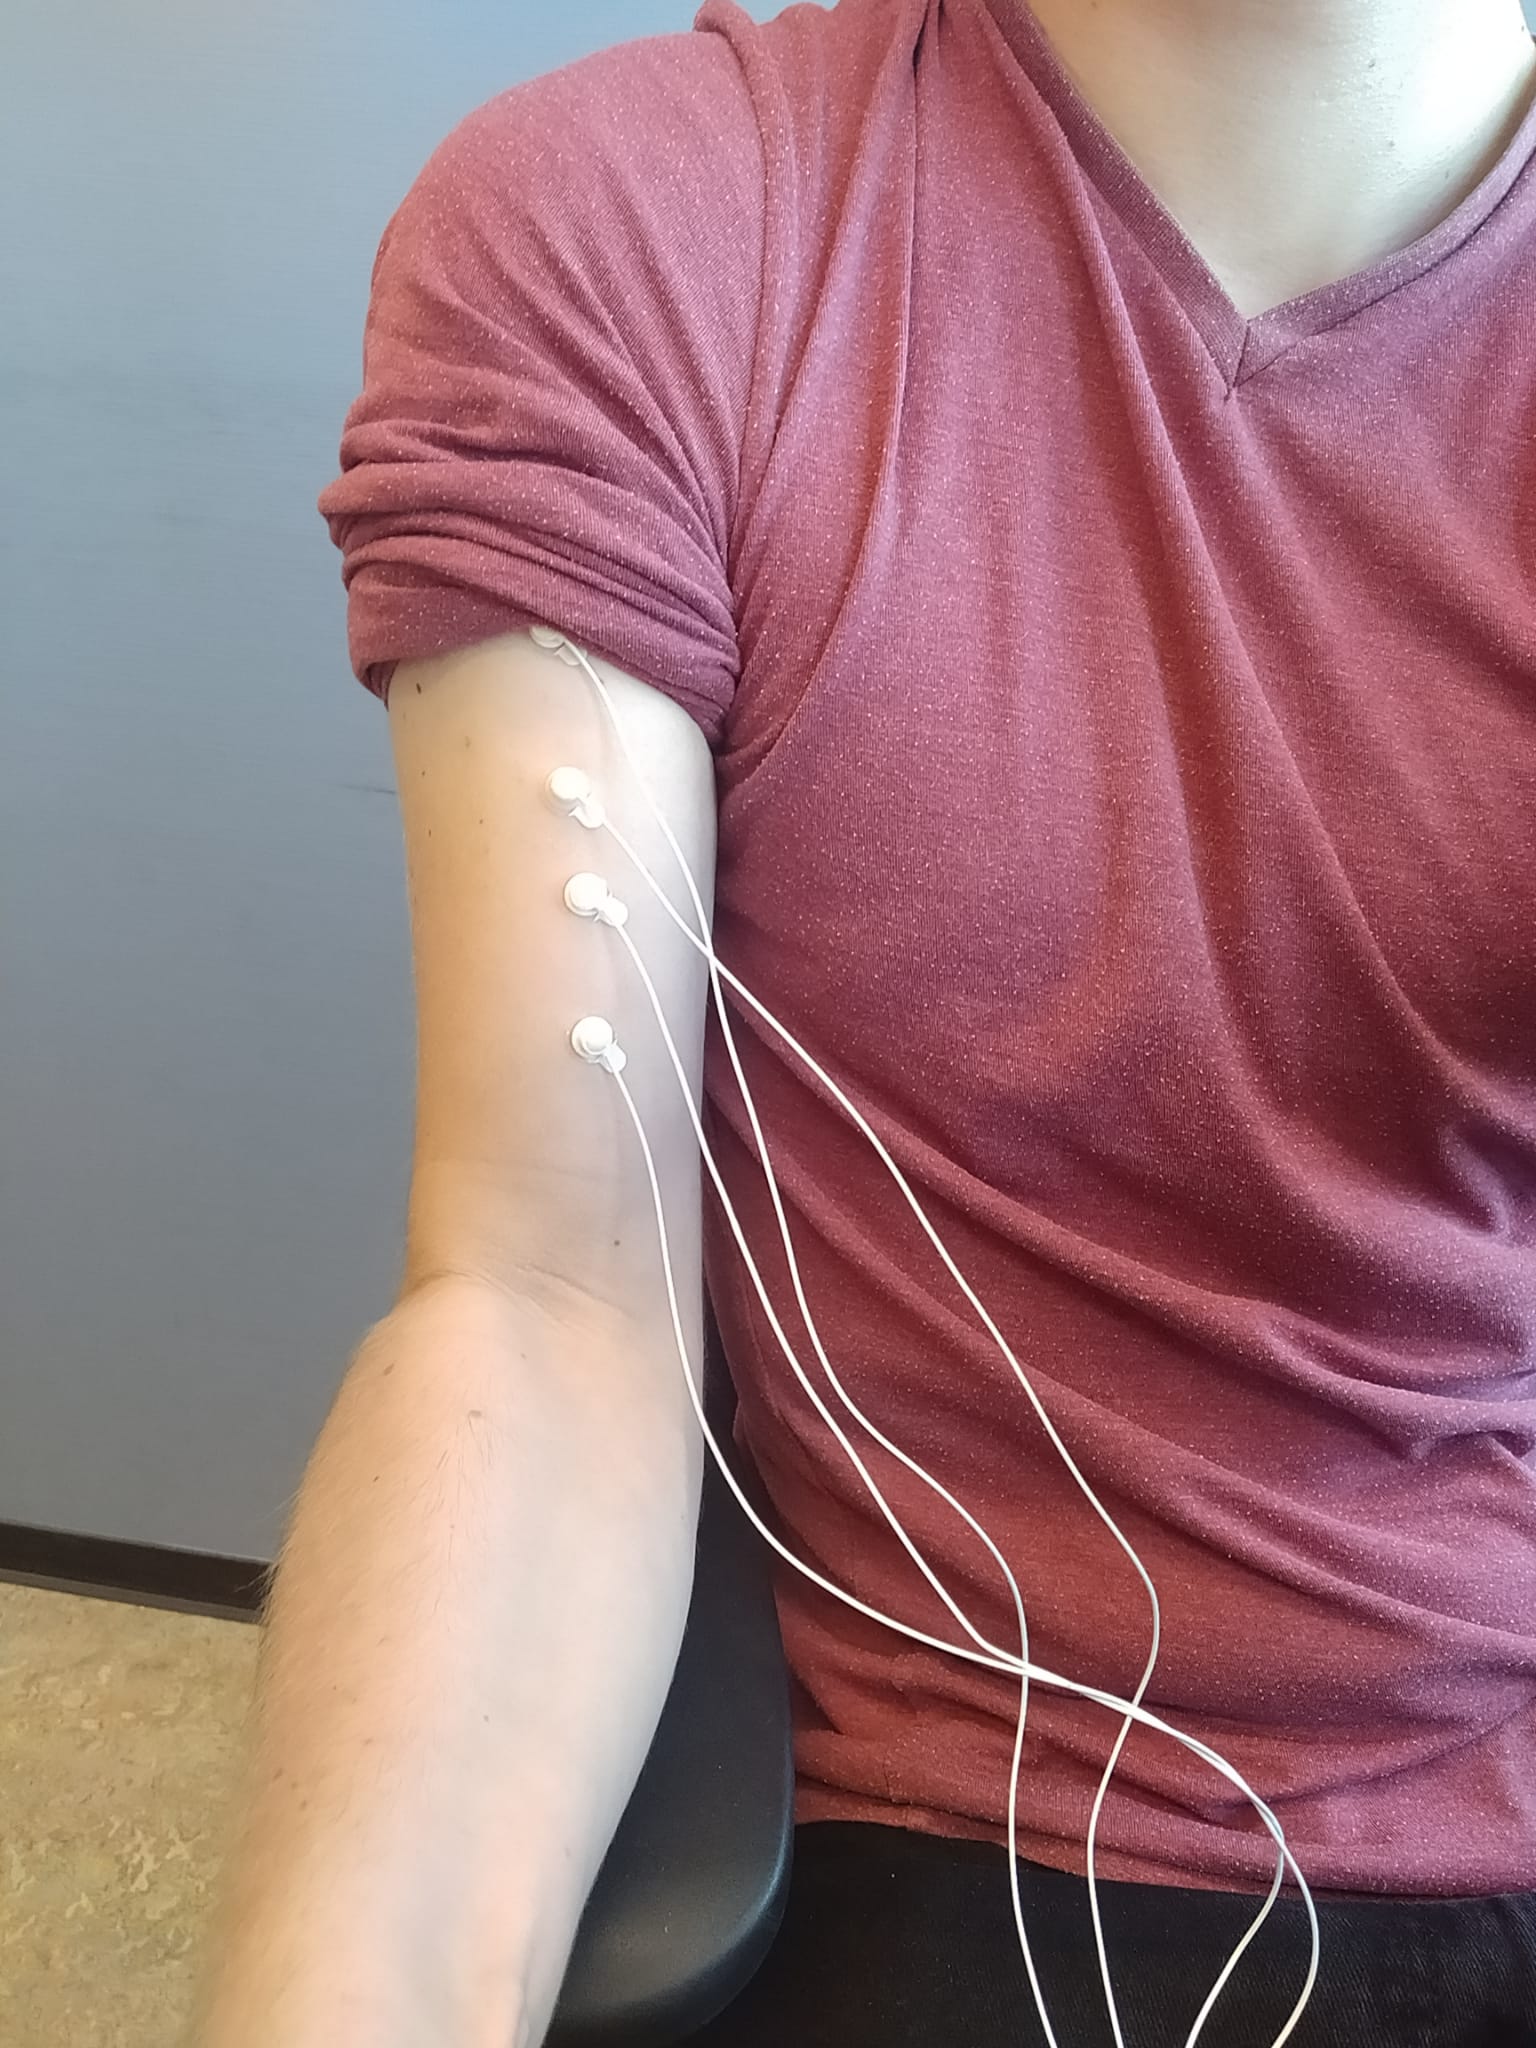 Figure 1: Placement of the 4 electrodes on the upper arm to measure the impedance of the bicep brachii.